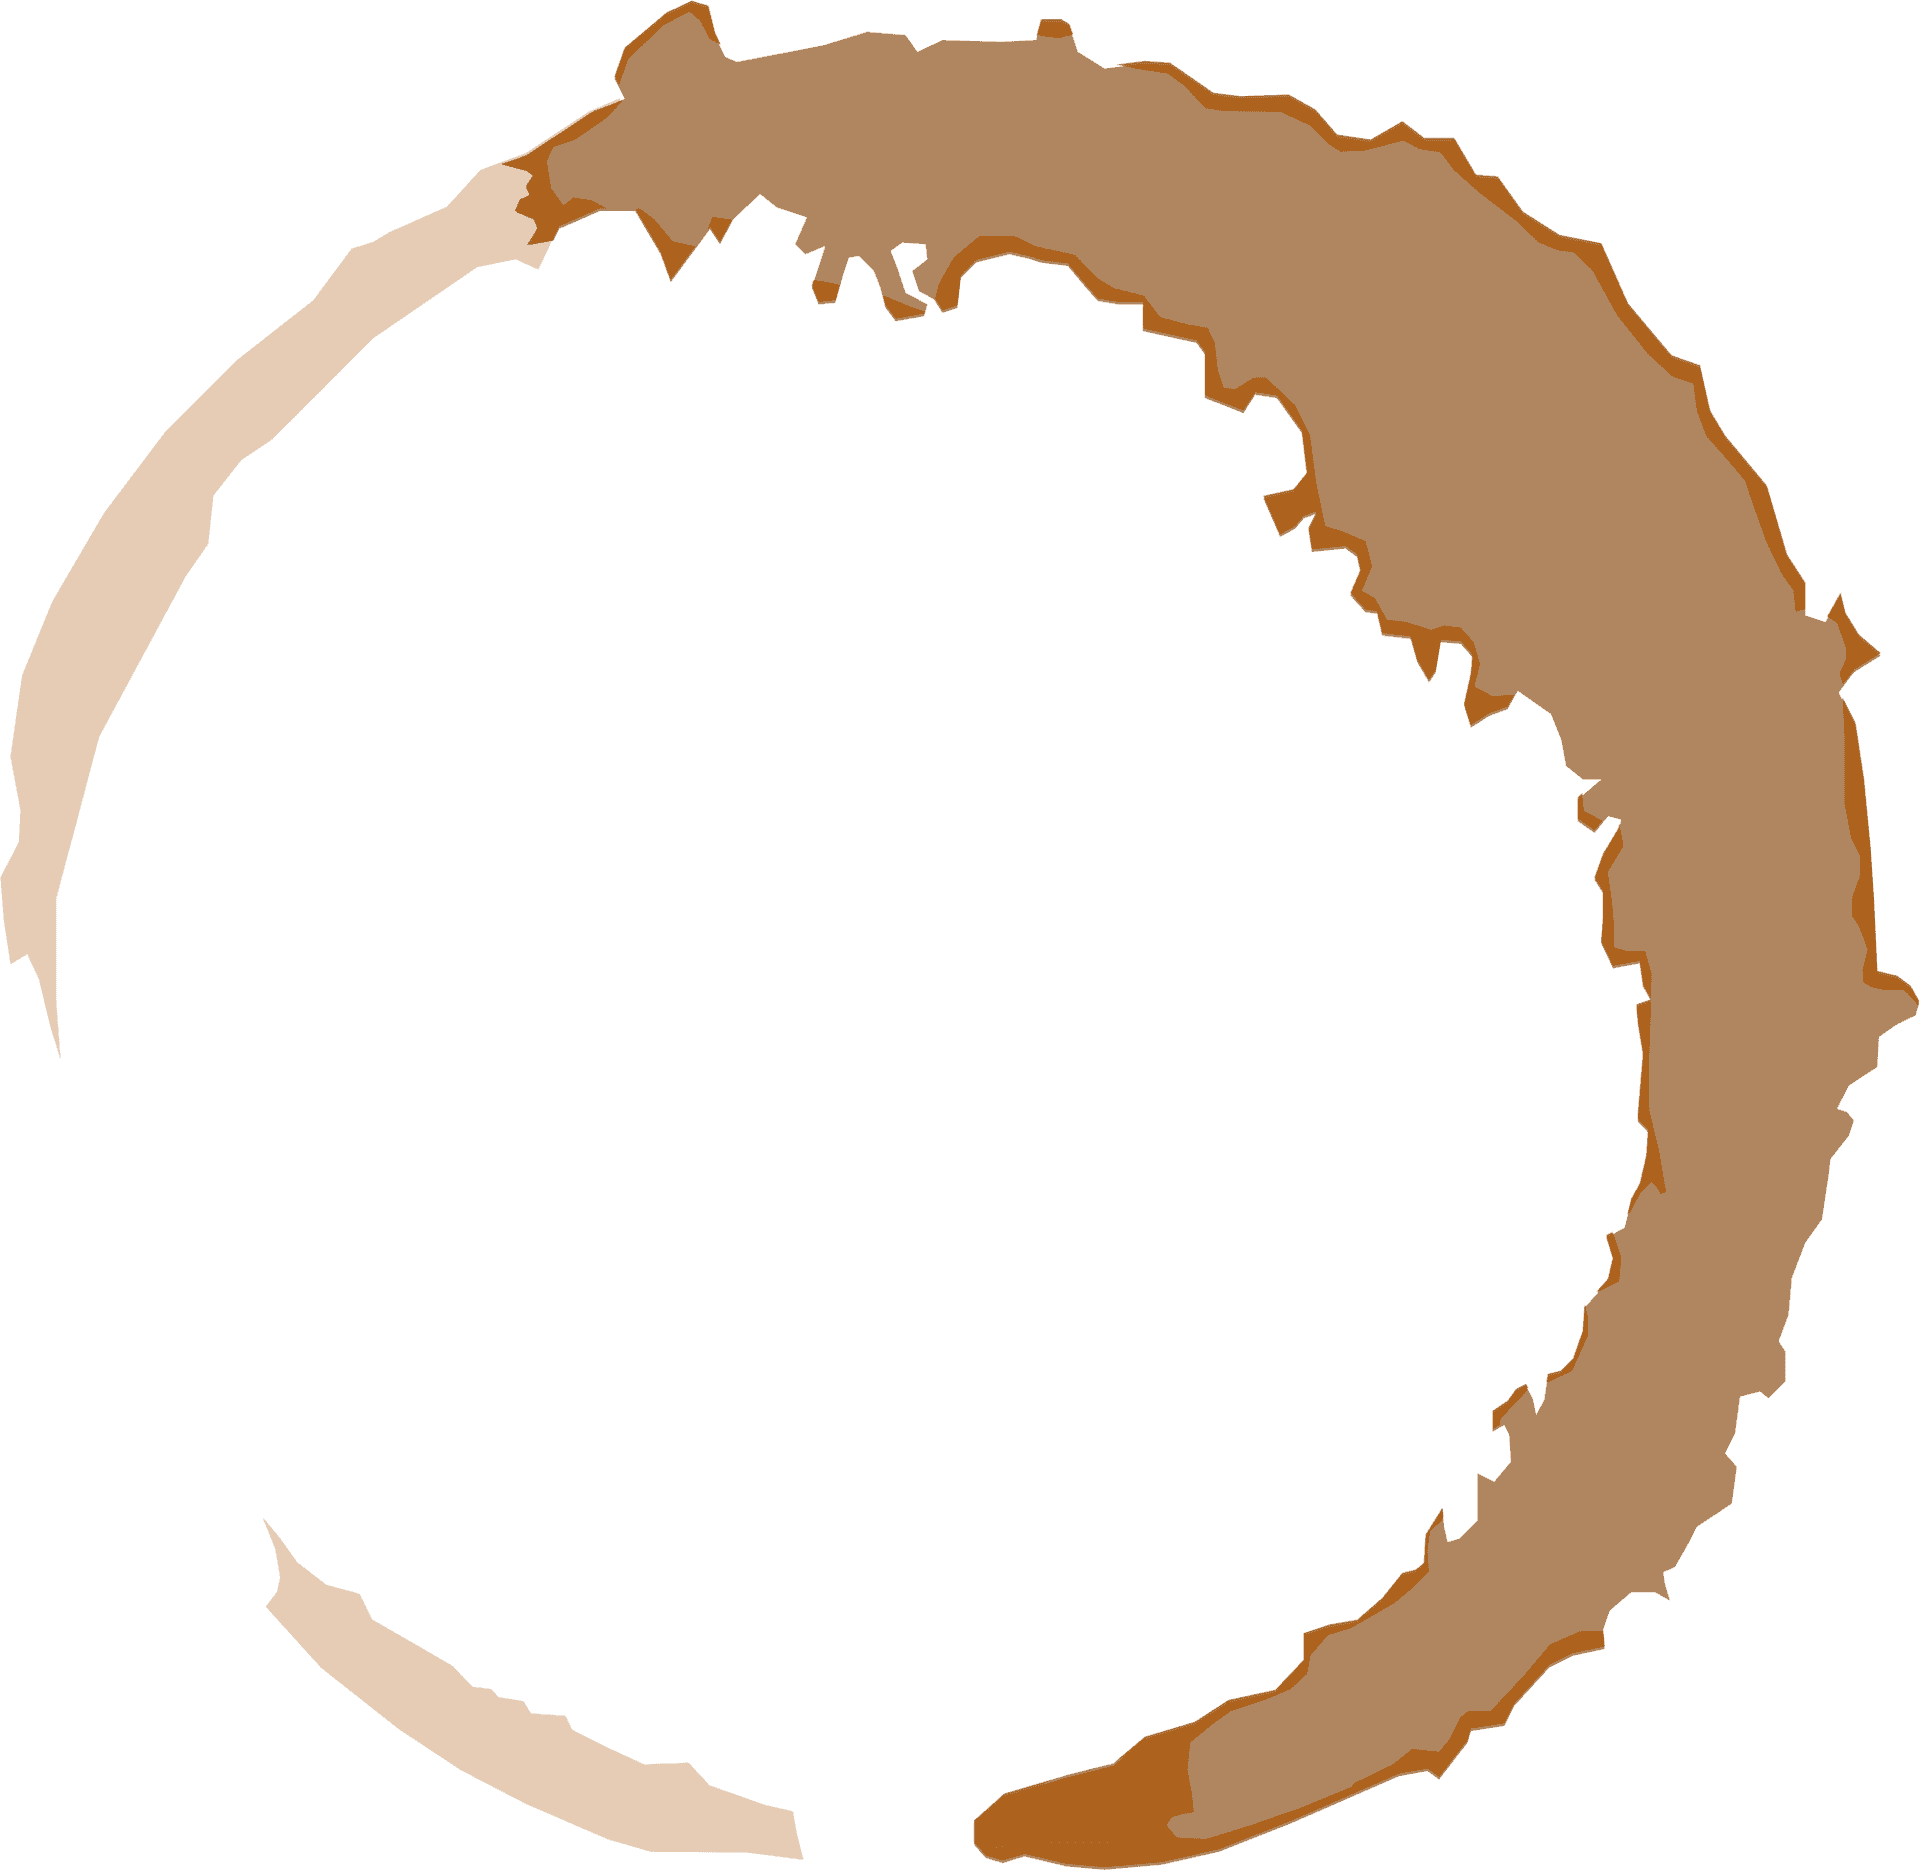 Circular Coffee Stain Texture PNG